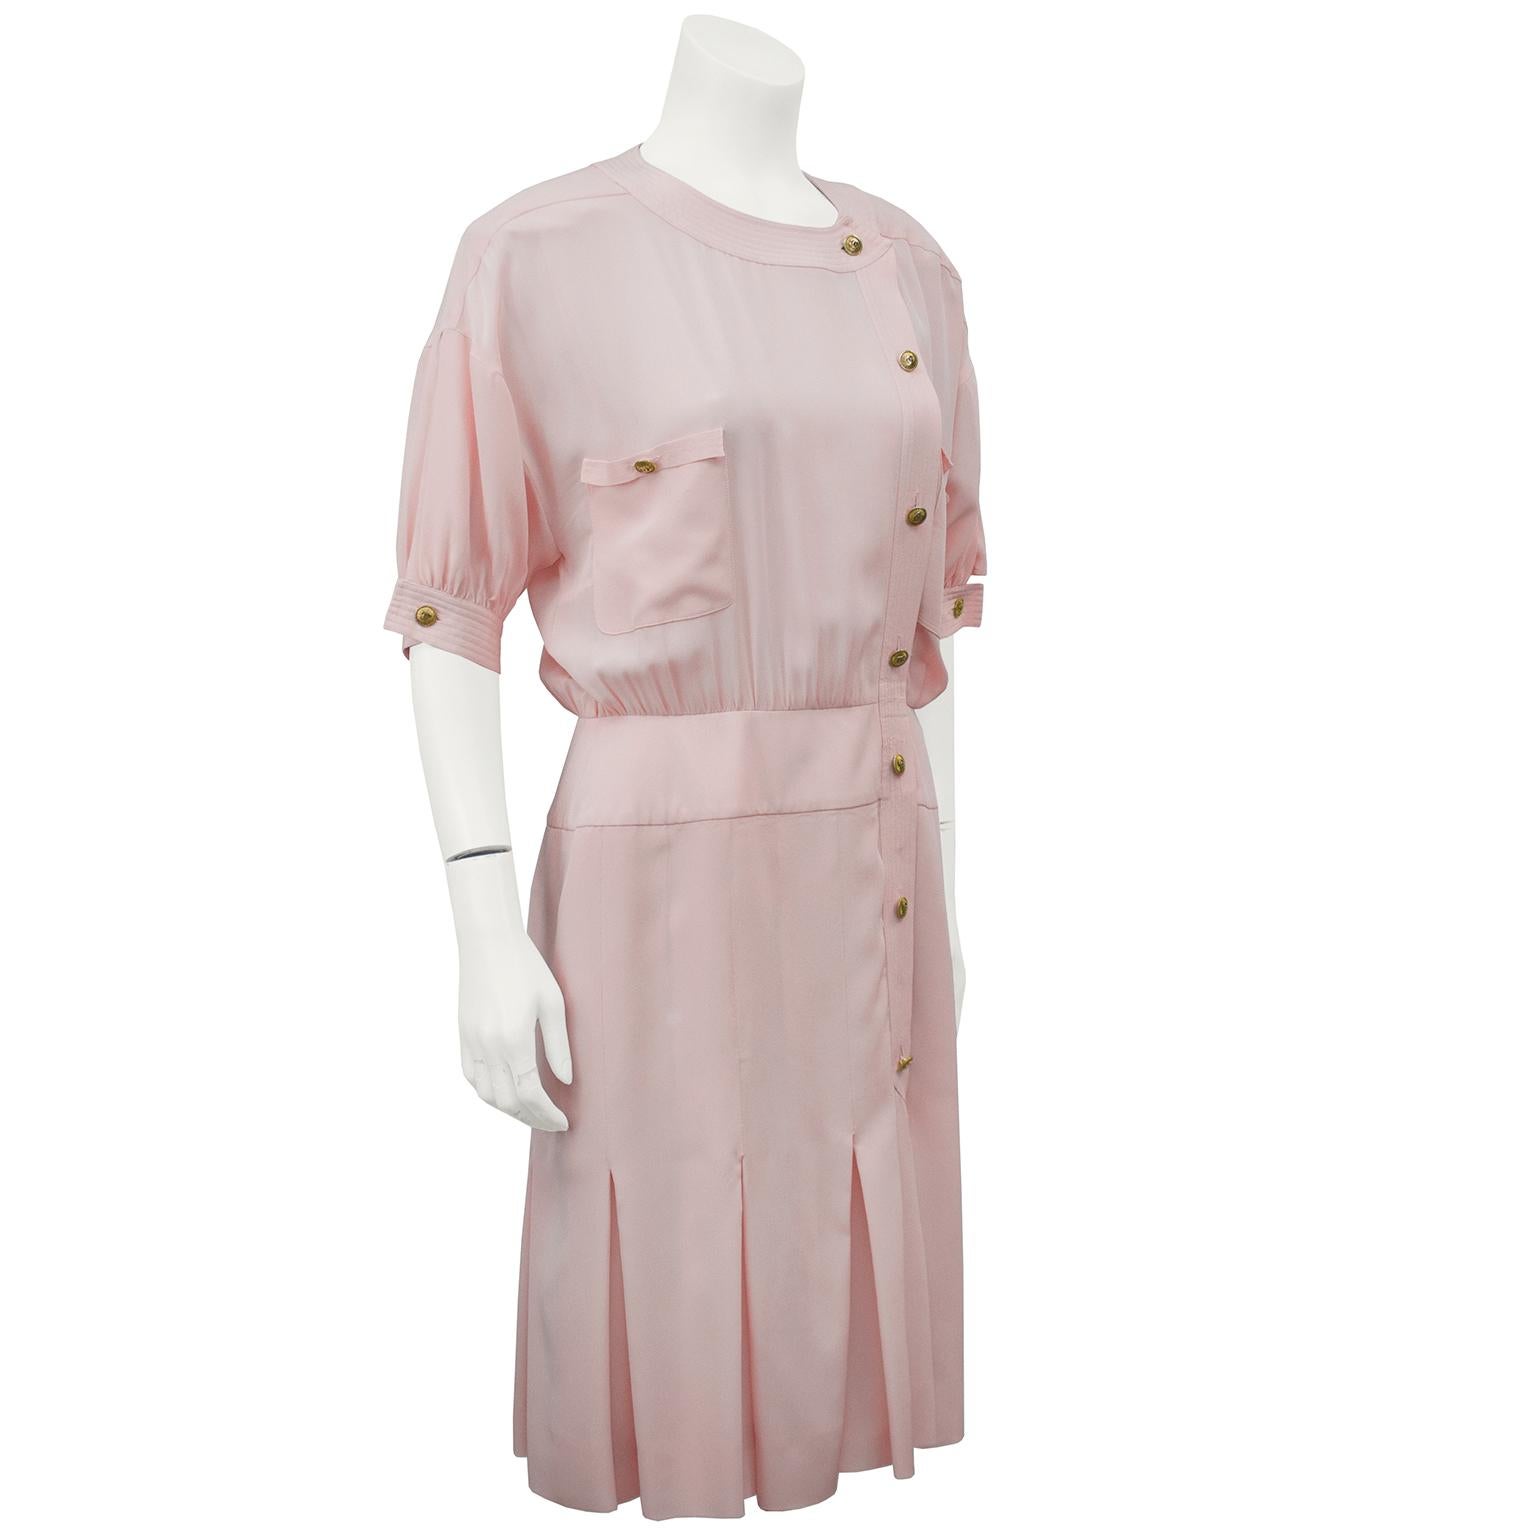 Classic style Chanel day dress from the 1980's. The off center button placket is complimented with two front patch pockets. The sleeves fall to the elbow and the cuffs are finished with goldtone Chanel buttons. Cinching at the natural waist, the